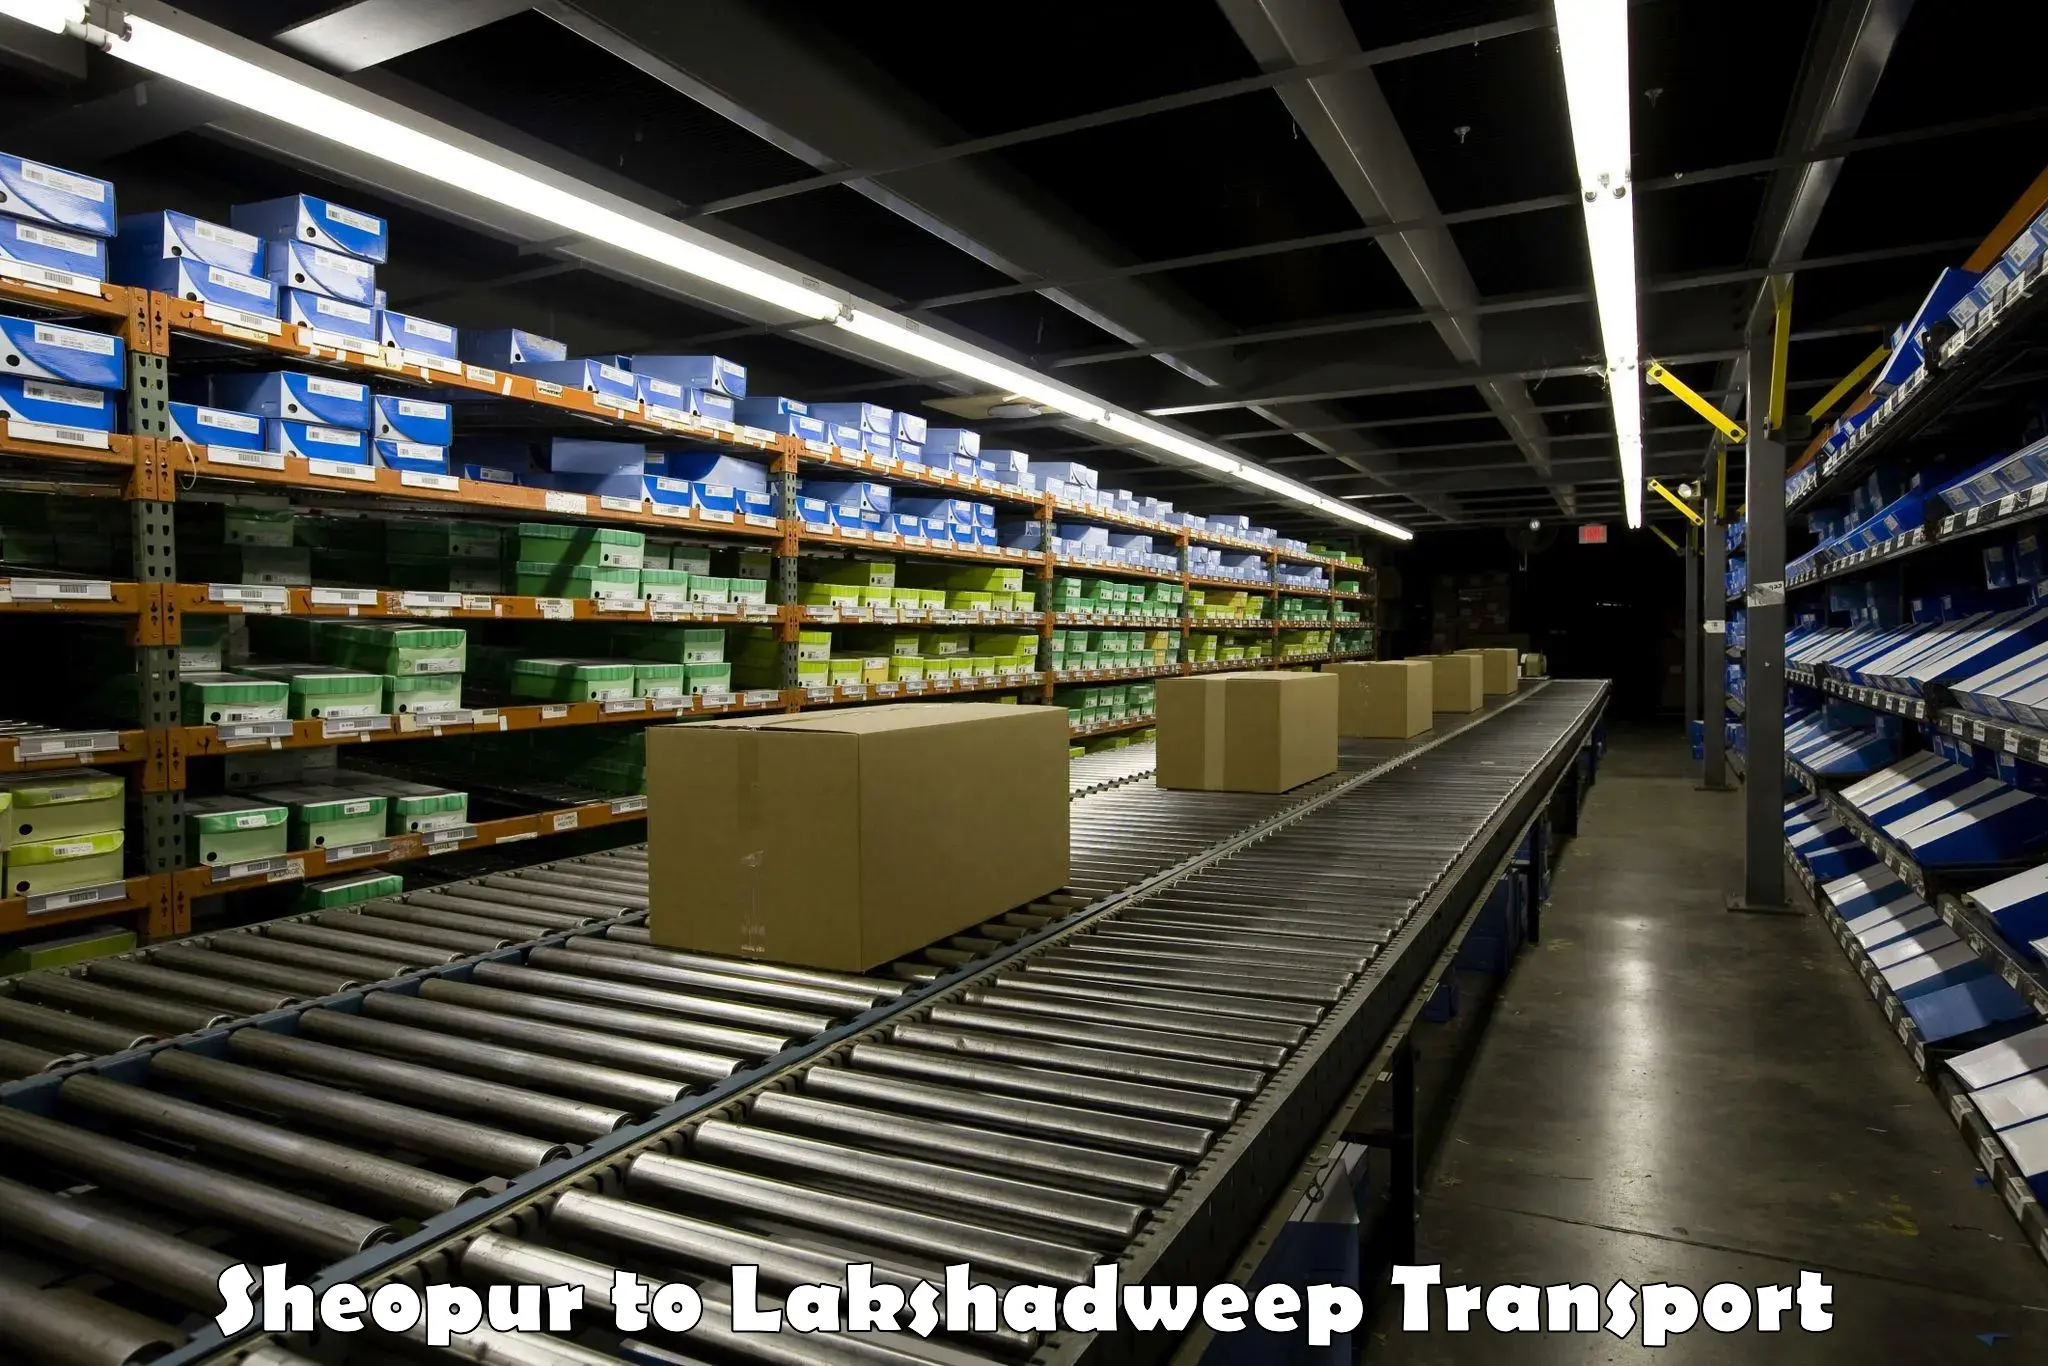 Lorry transport service Sheopur to Lakshadweep